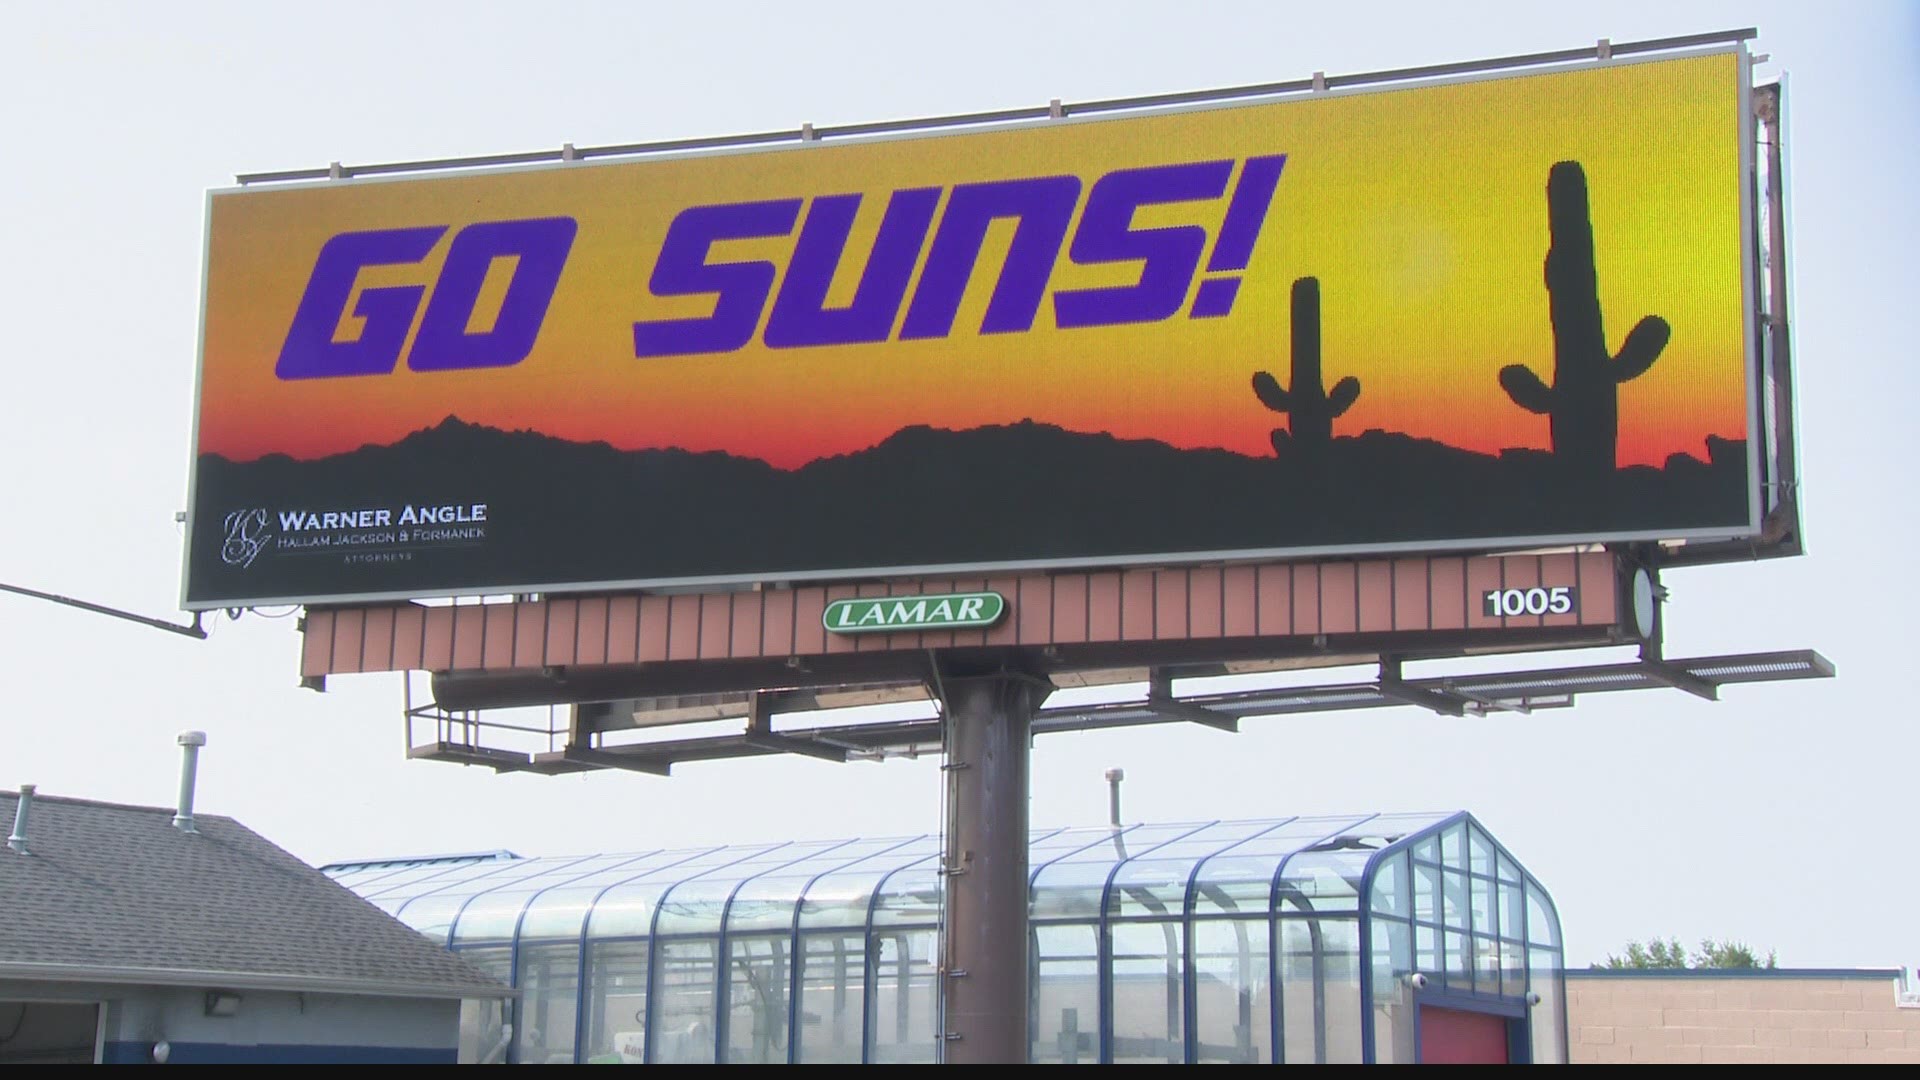 The city of Milwaukee woke up Monday morning to the billboard right in the heart of downtown.